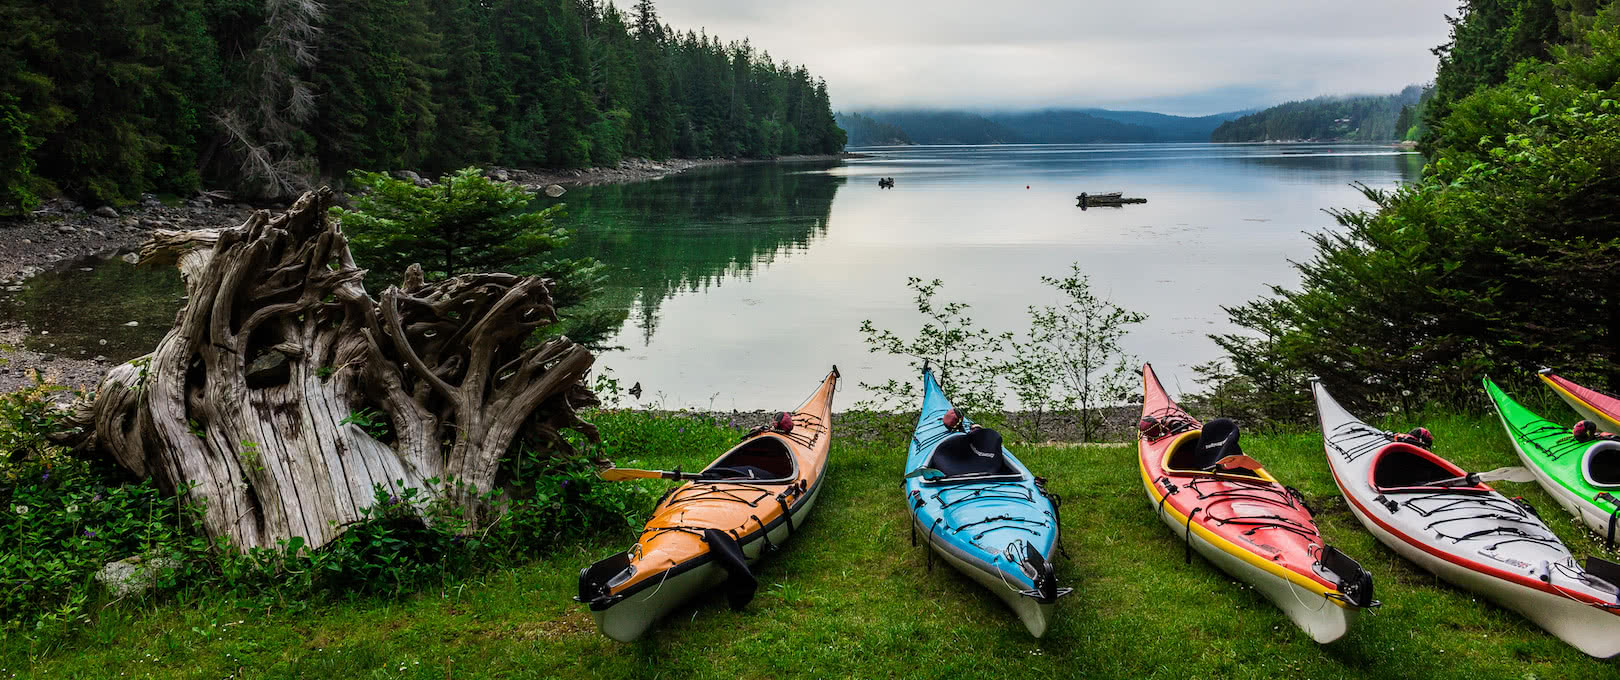 kayaks lined up by the water